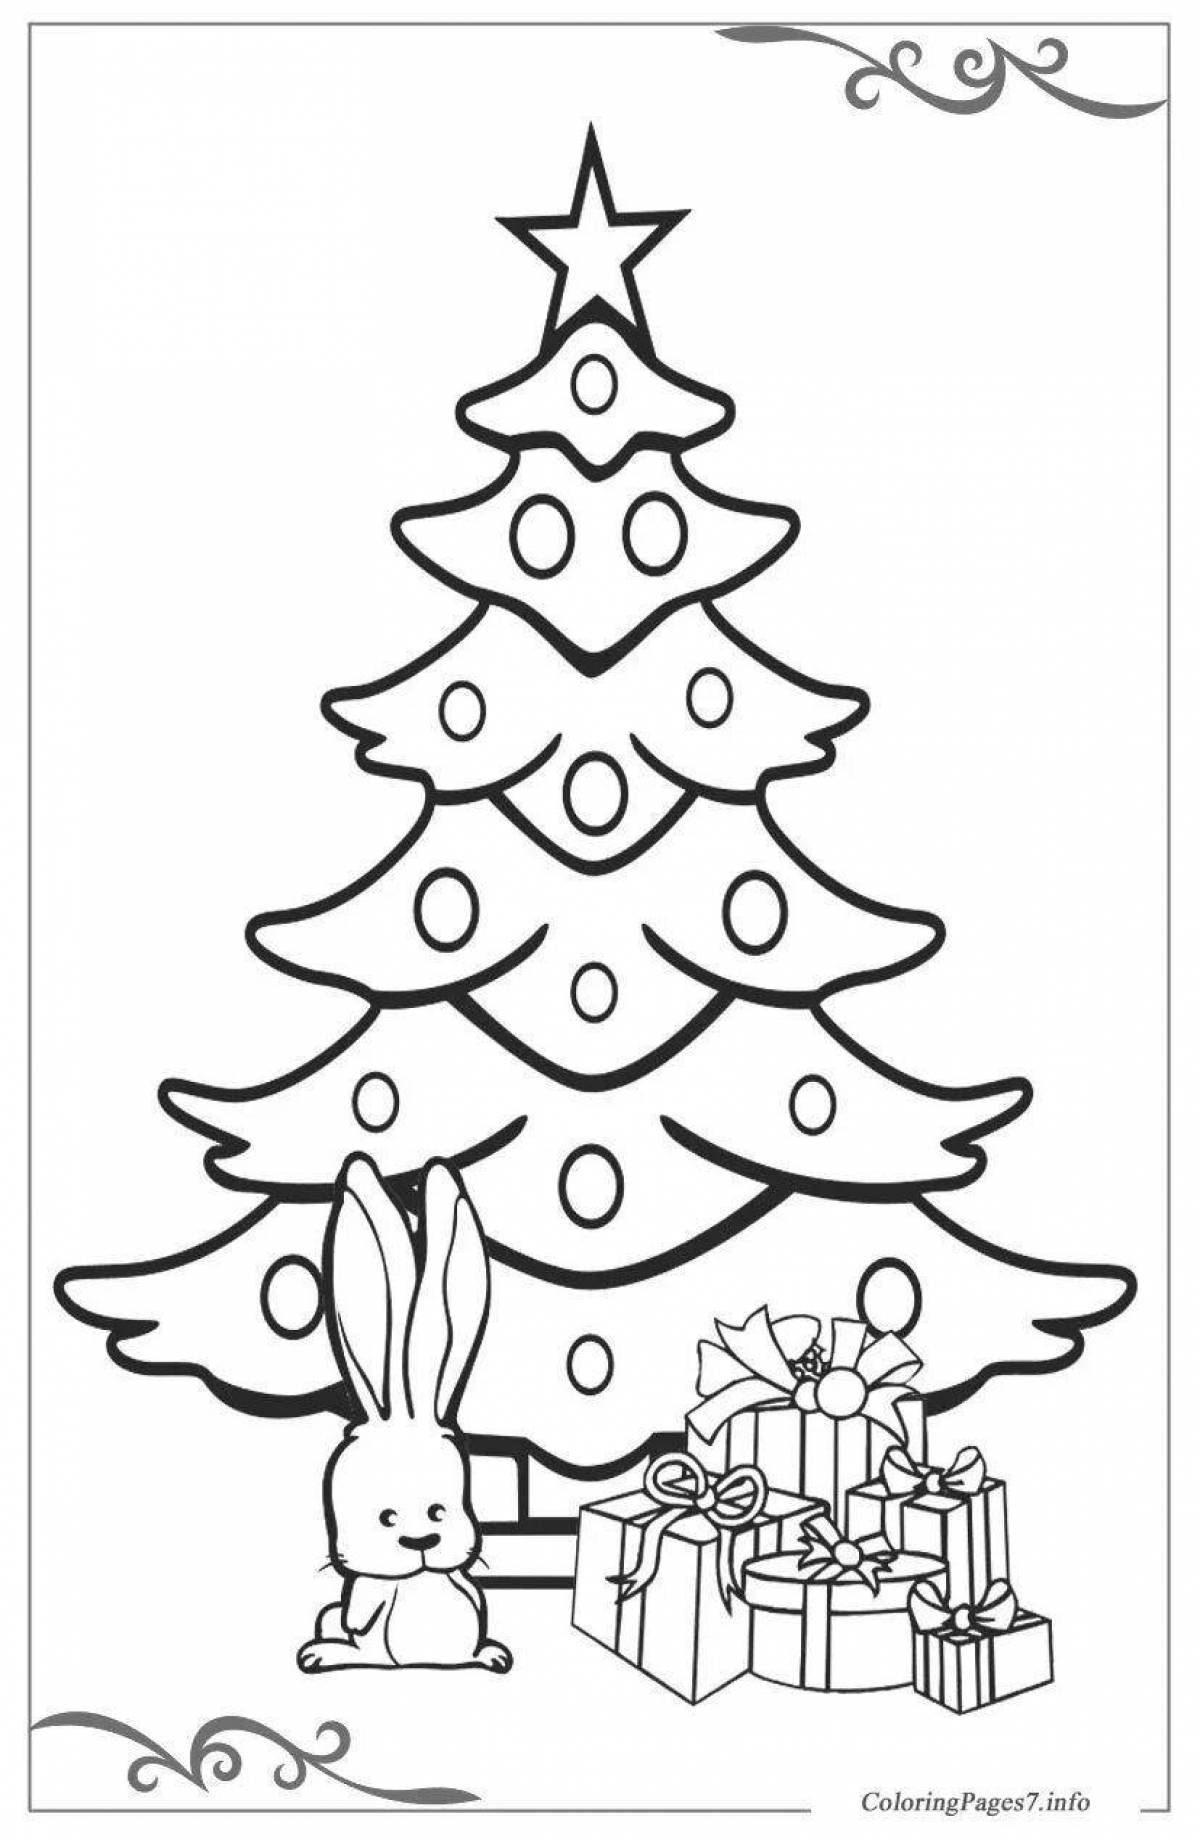 Christmas tree card coloring page